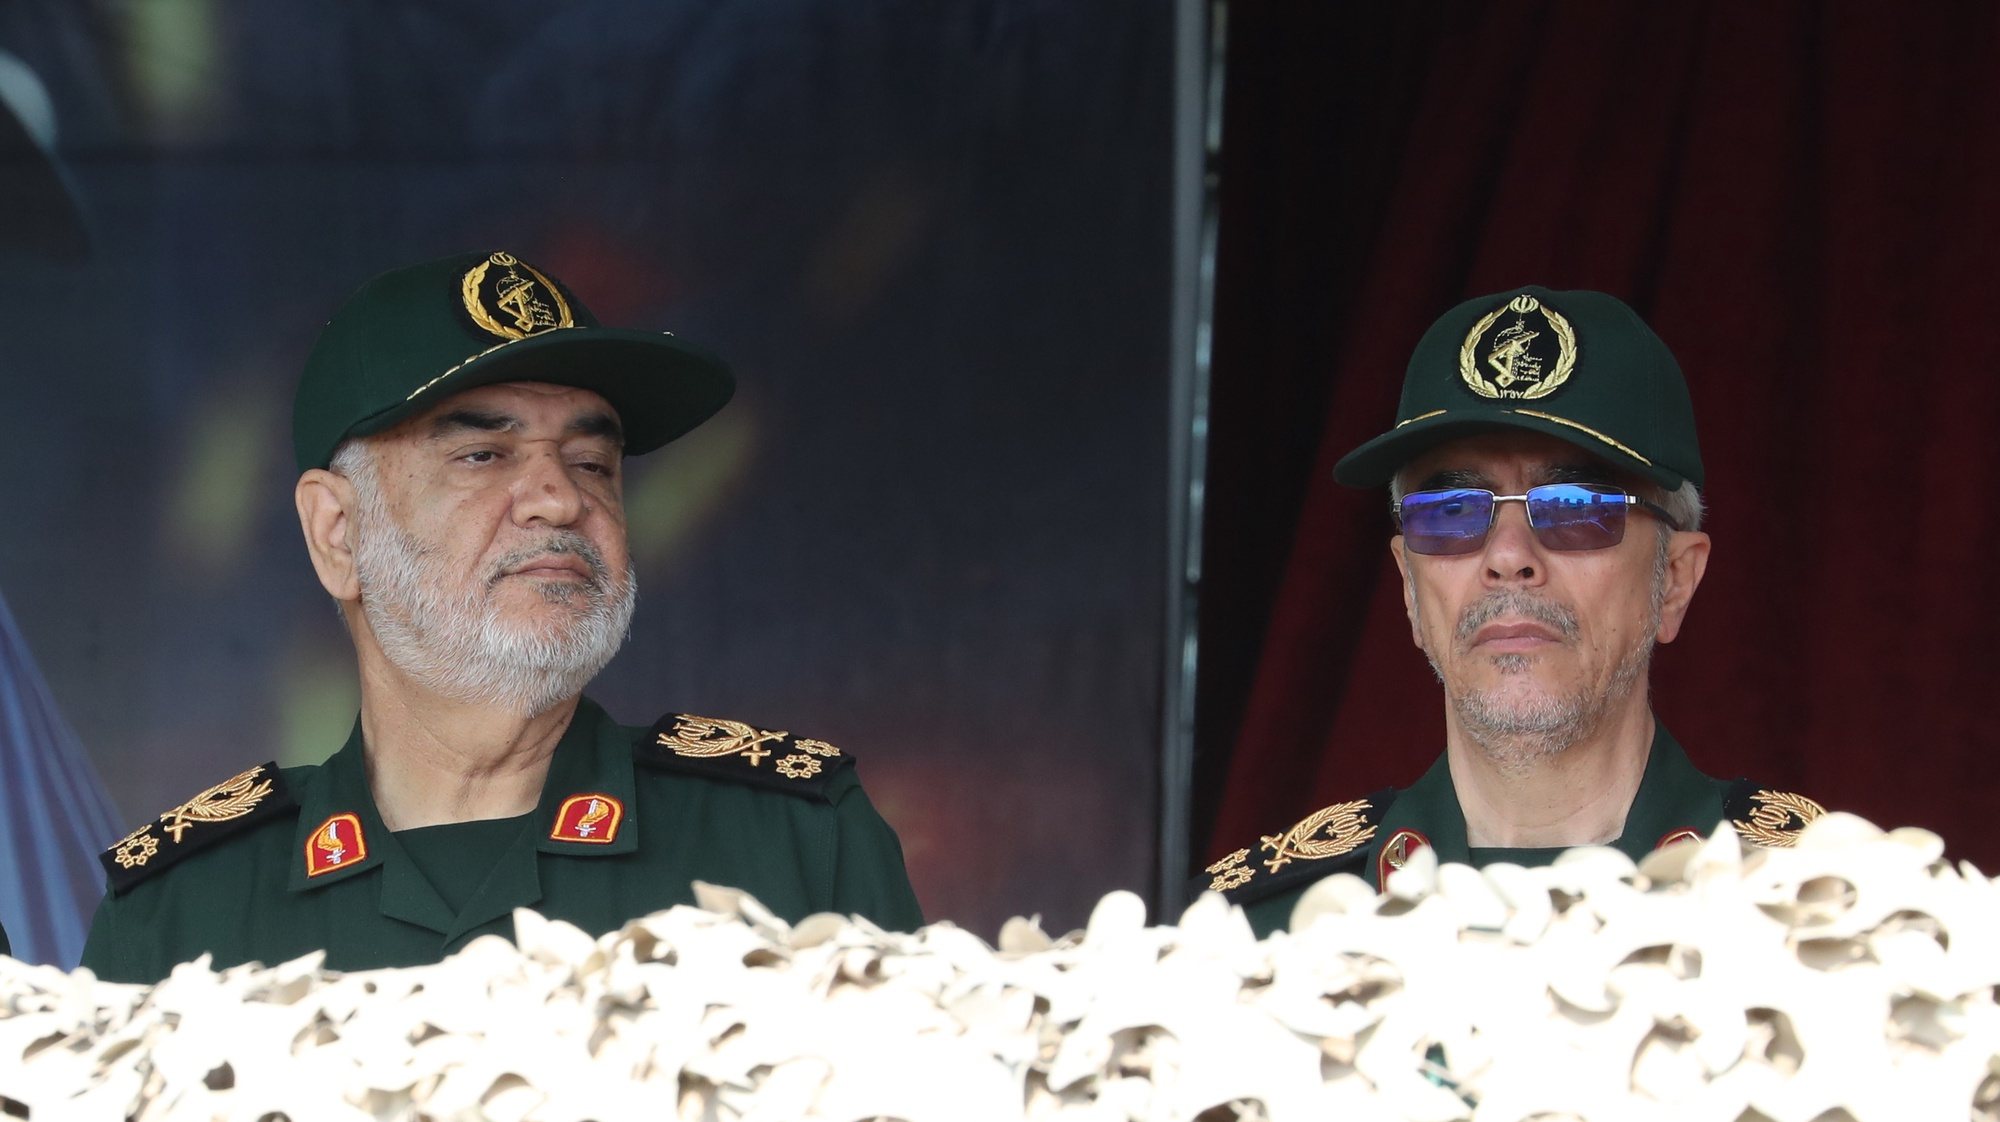 epa11283753 Islamic Revolutionary Guard Corps military commander General Mohammad Bagheri (R) and head of Iranian revolutionary guard corps (IRGC) Hossein Salami (L) attend the Army Day in a military base in Tehran, Iran, 17 April 2024. According to Iranian state media, Raisi described the recent attack launched towards Israel as &#039;limited&#039; and &#039;punitive&#039;, adding that any act of aggression against Iran will be dealt with a &#039;powerful and fierce&#039; response. Iran&#039;s Islamic Revolutionary Guards Corps (IRGC) launched drones and rockets towards Israel late on 13 April.  EPA/ABEDIN TAHERKENAREH